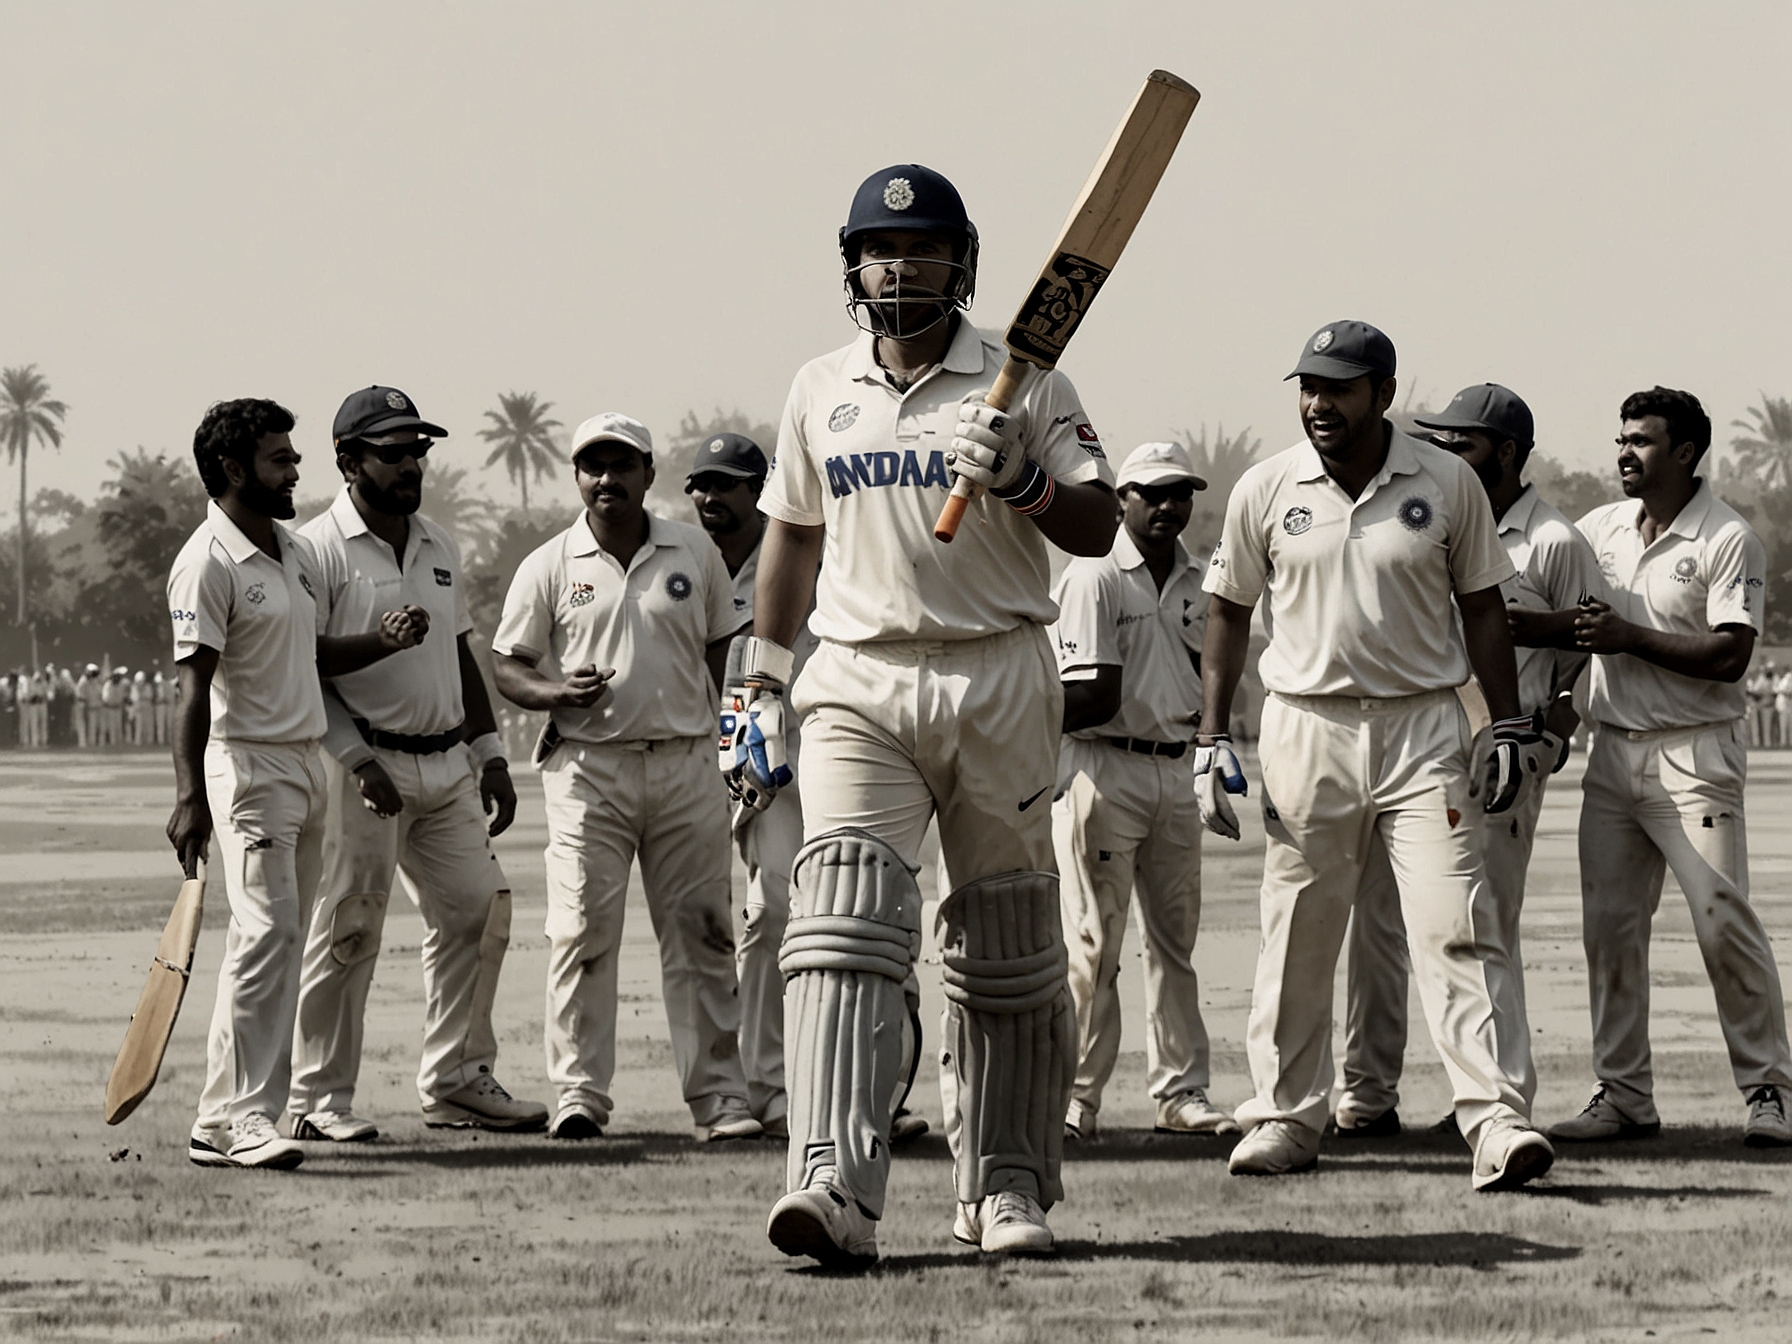 An image depicting Indian cricketer Rohit Sharma leading his team in a high-stakes match, paralleled with a scene from the Bollywood movie 'Lagaan,' illustrating the theme of underdogs versus champions.